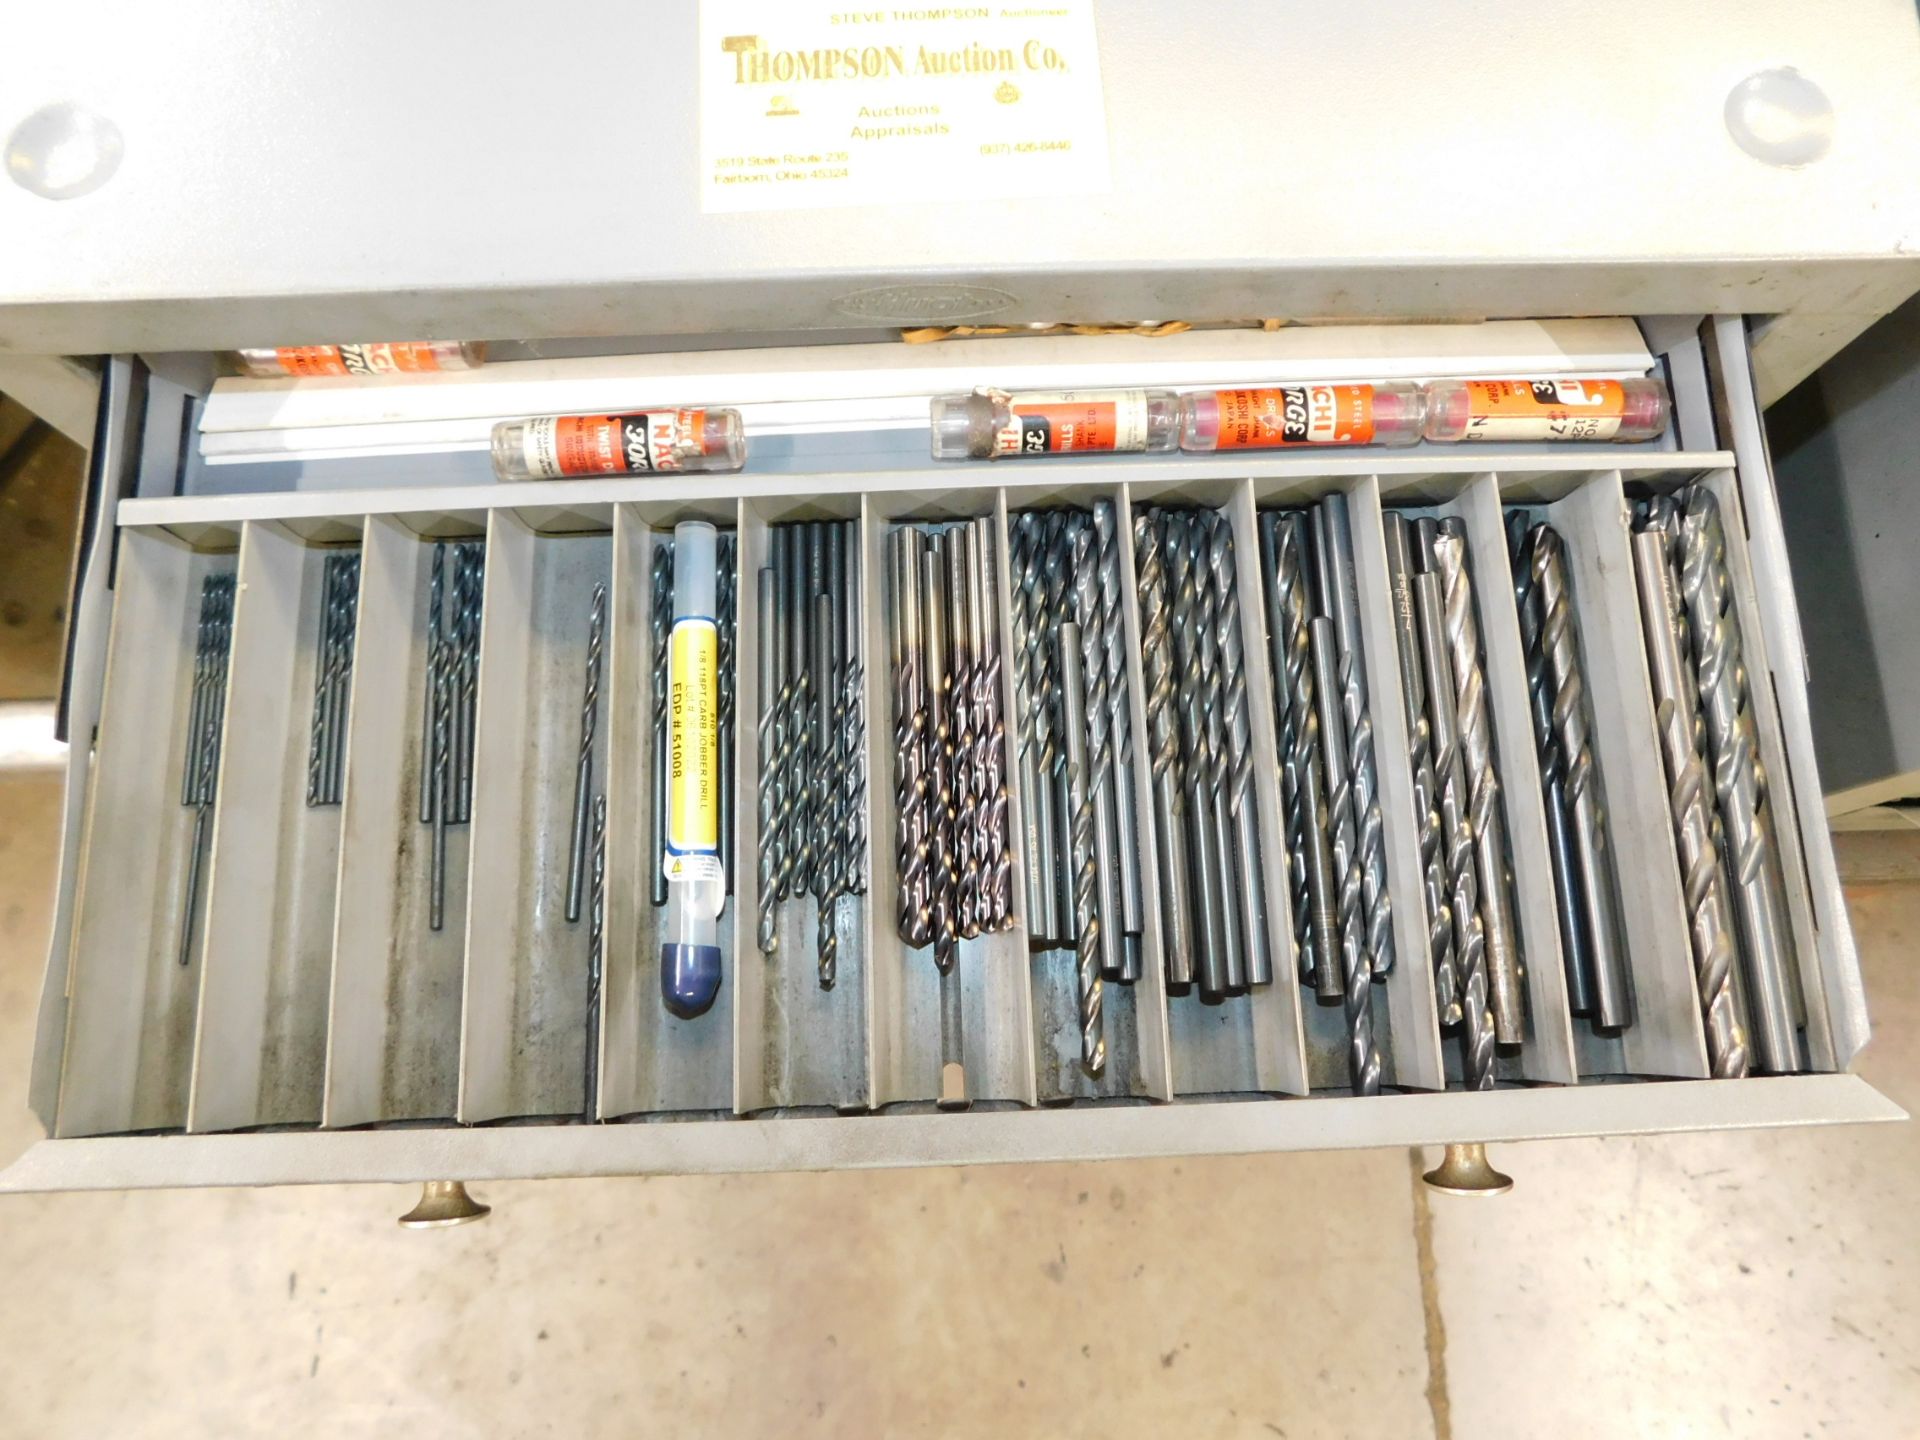 Drill Bit Cabinet with Fractional Drill Bits - Image 2 of 4